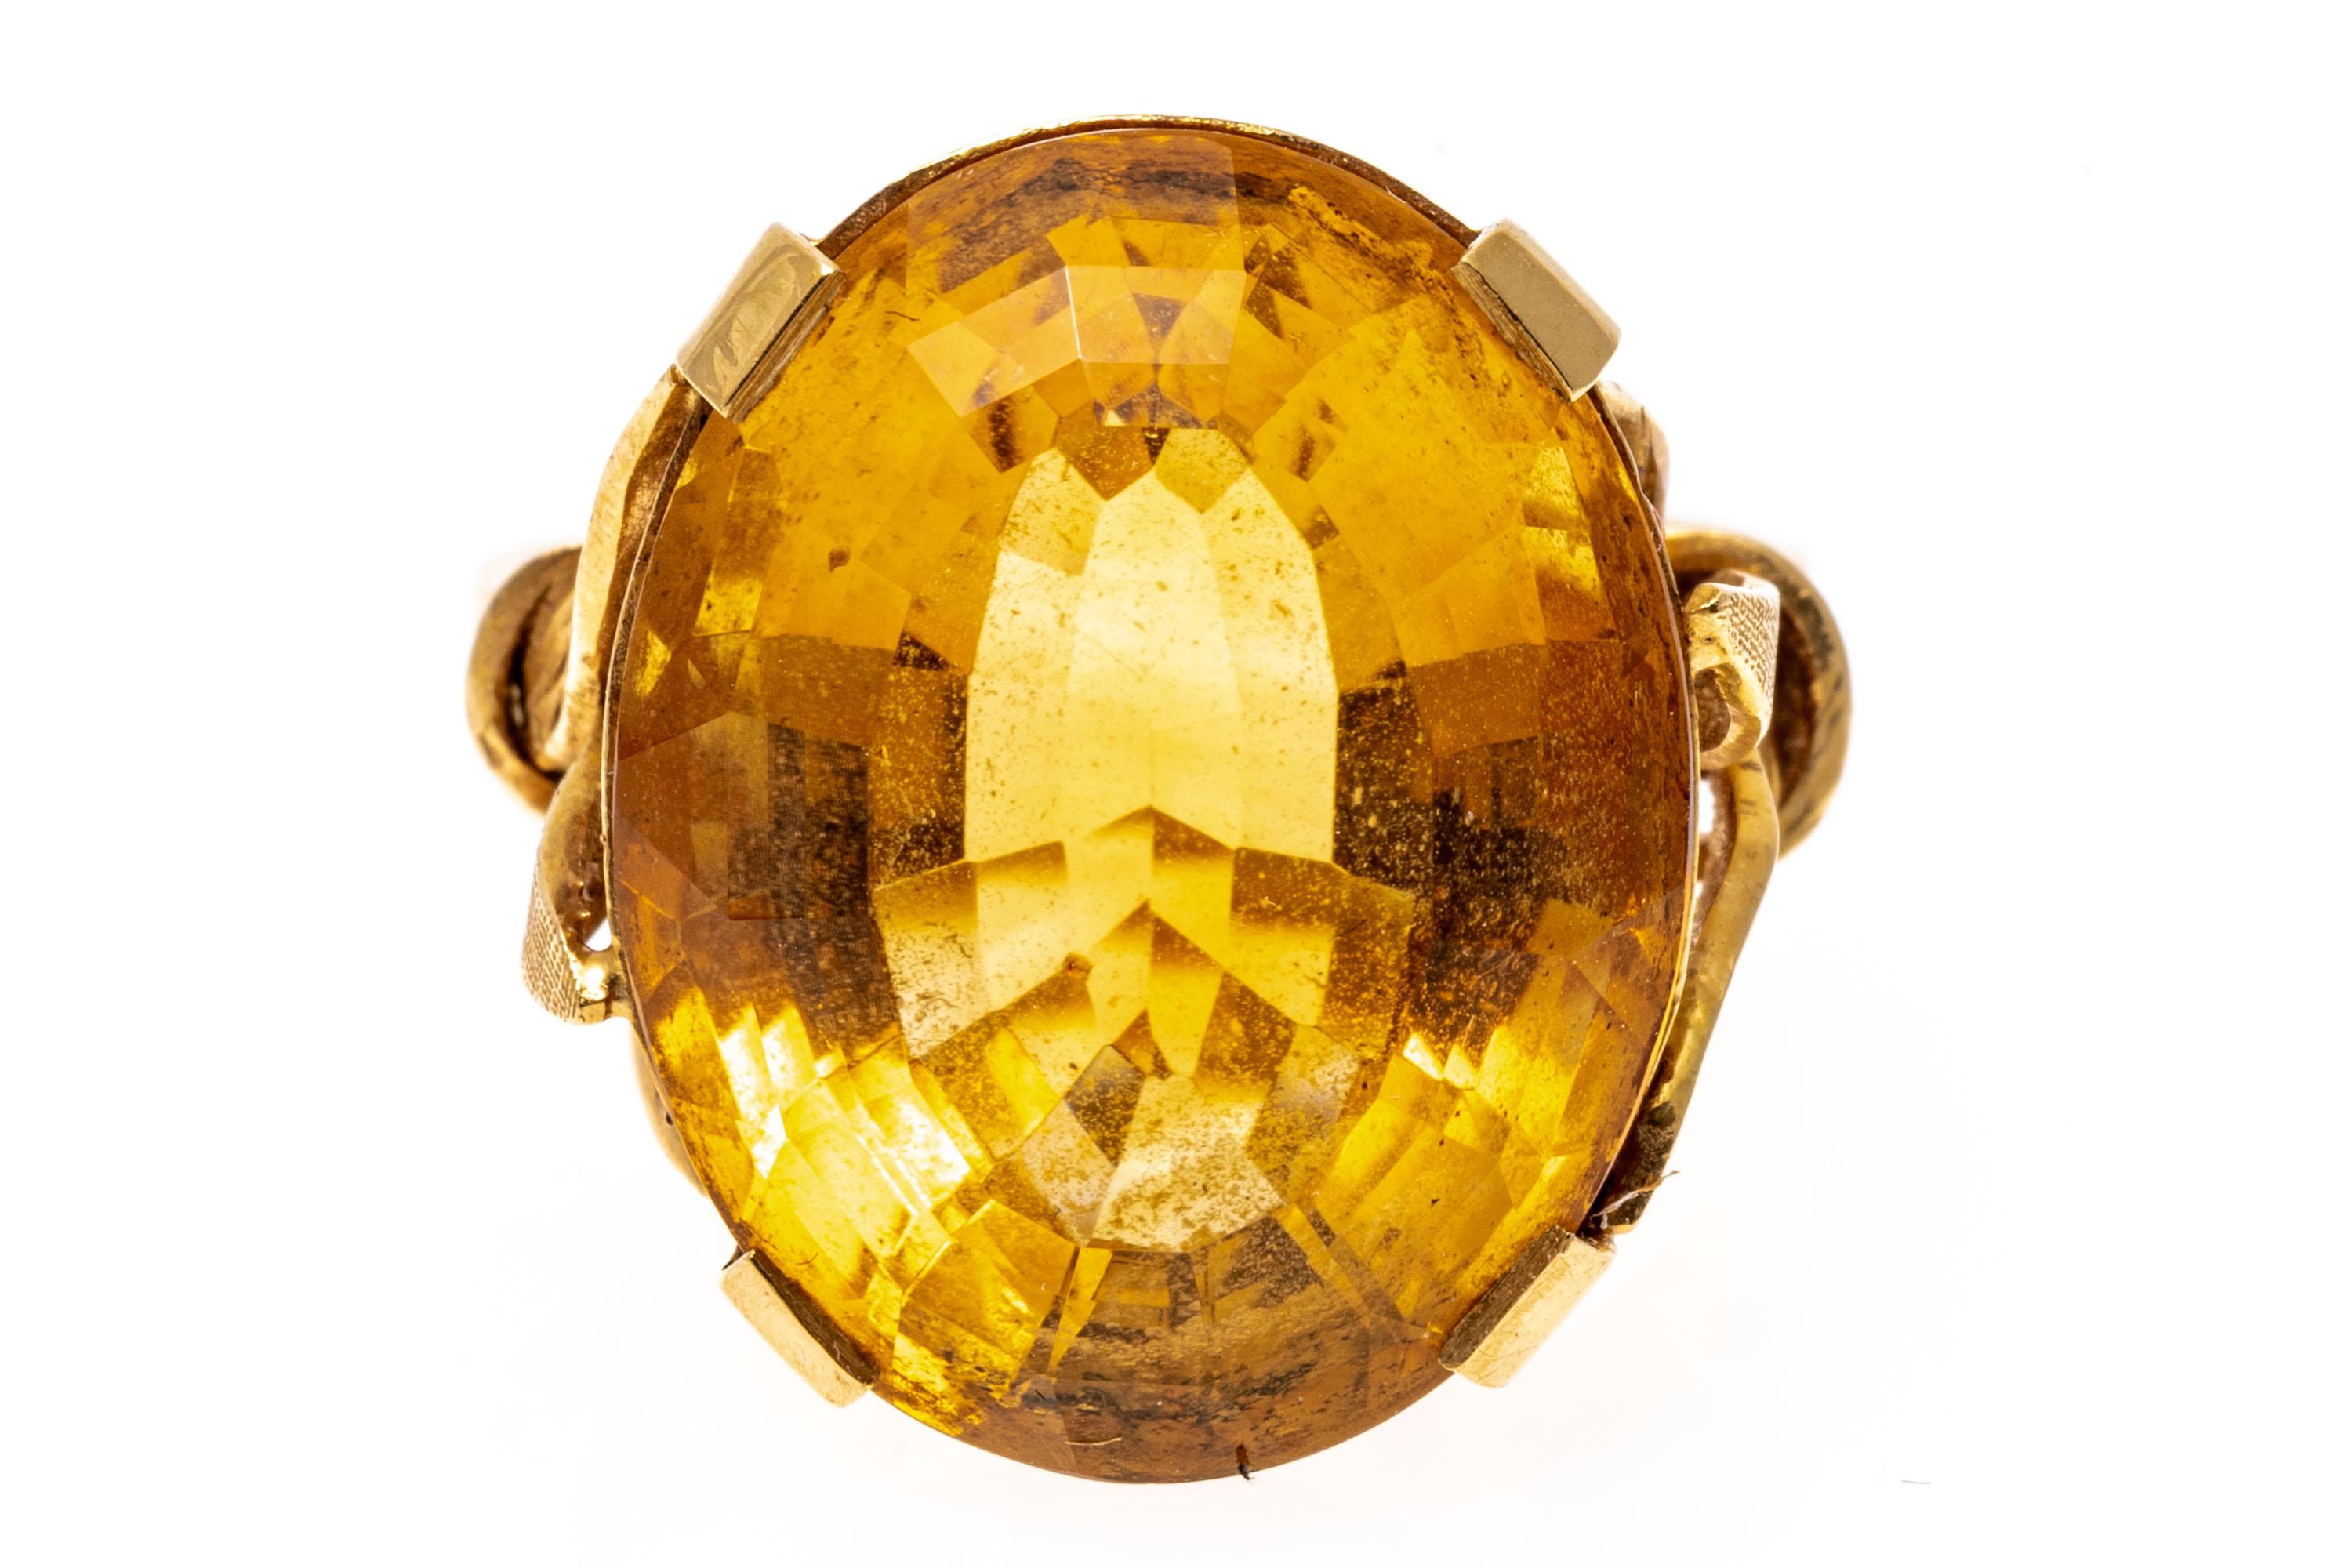 18k yellow gold ring. This delightful ring features a center oval faceted, medium golden yellow color citrine, approximately 13.60 CTS, accented by florentined and high polished gathered foliate shoulders.
Marks: 750
Dimensions: 9/16